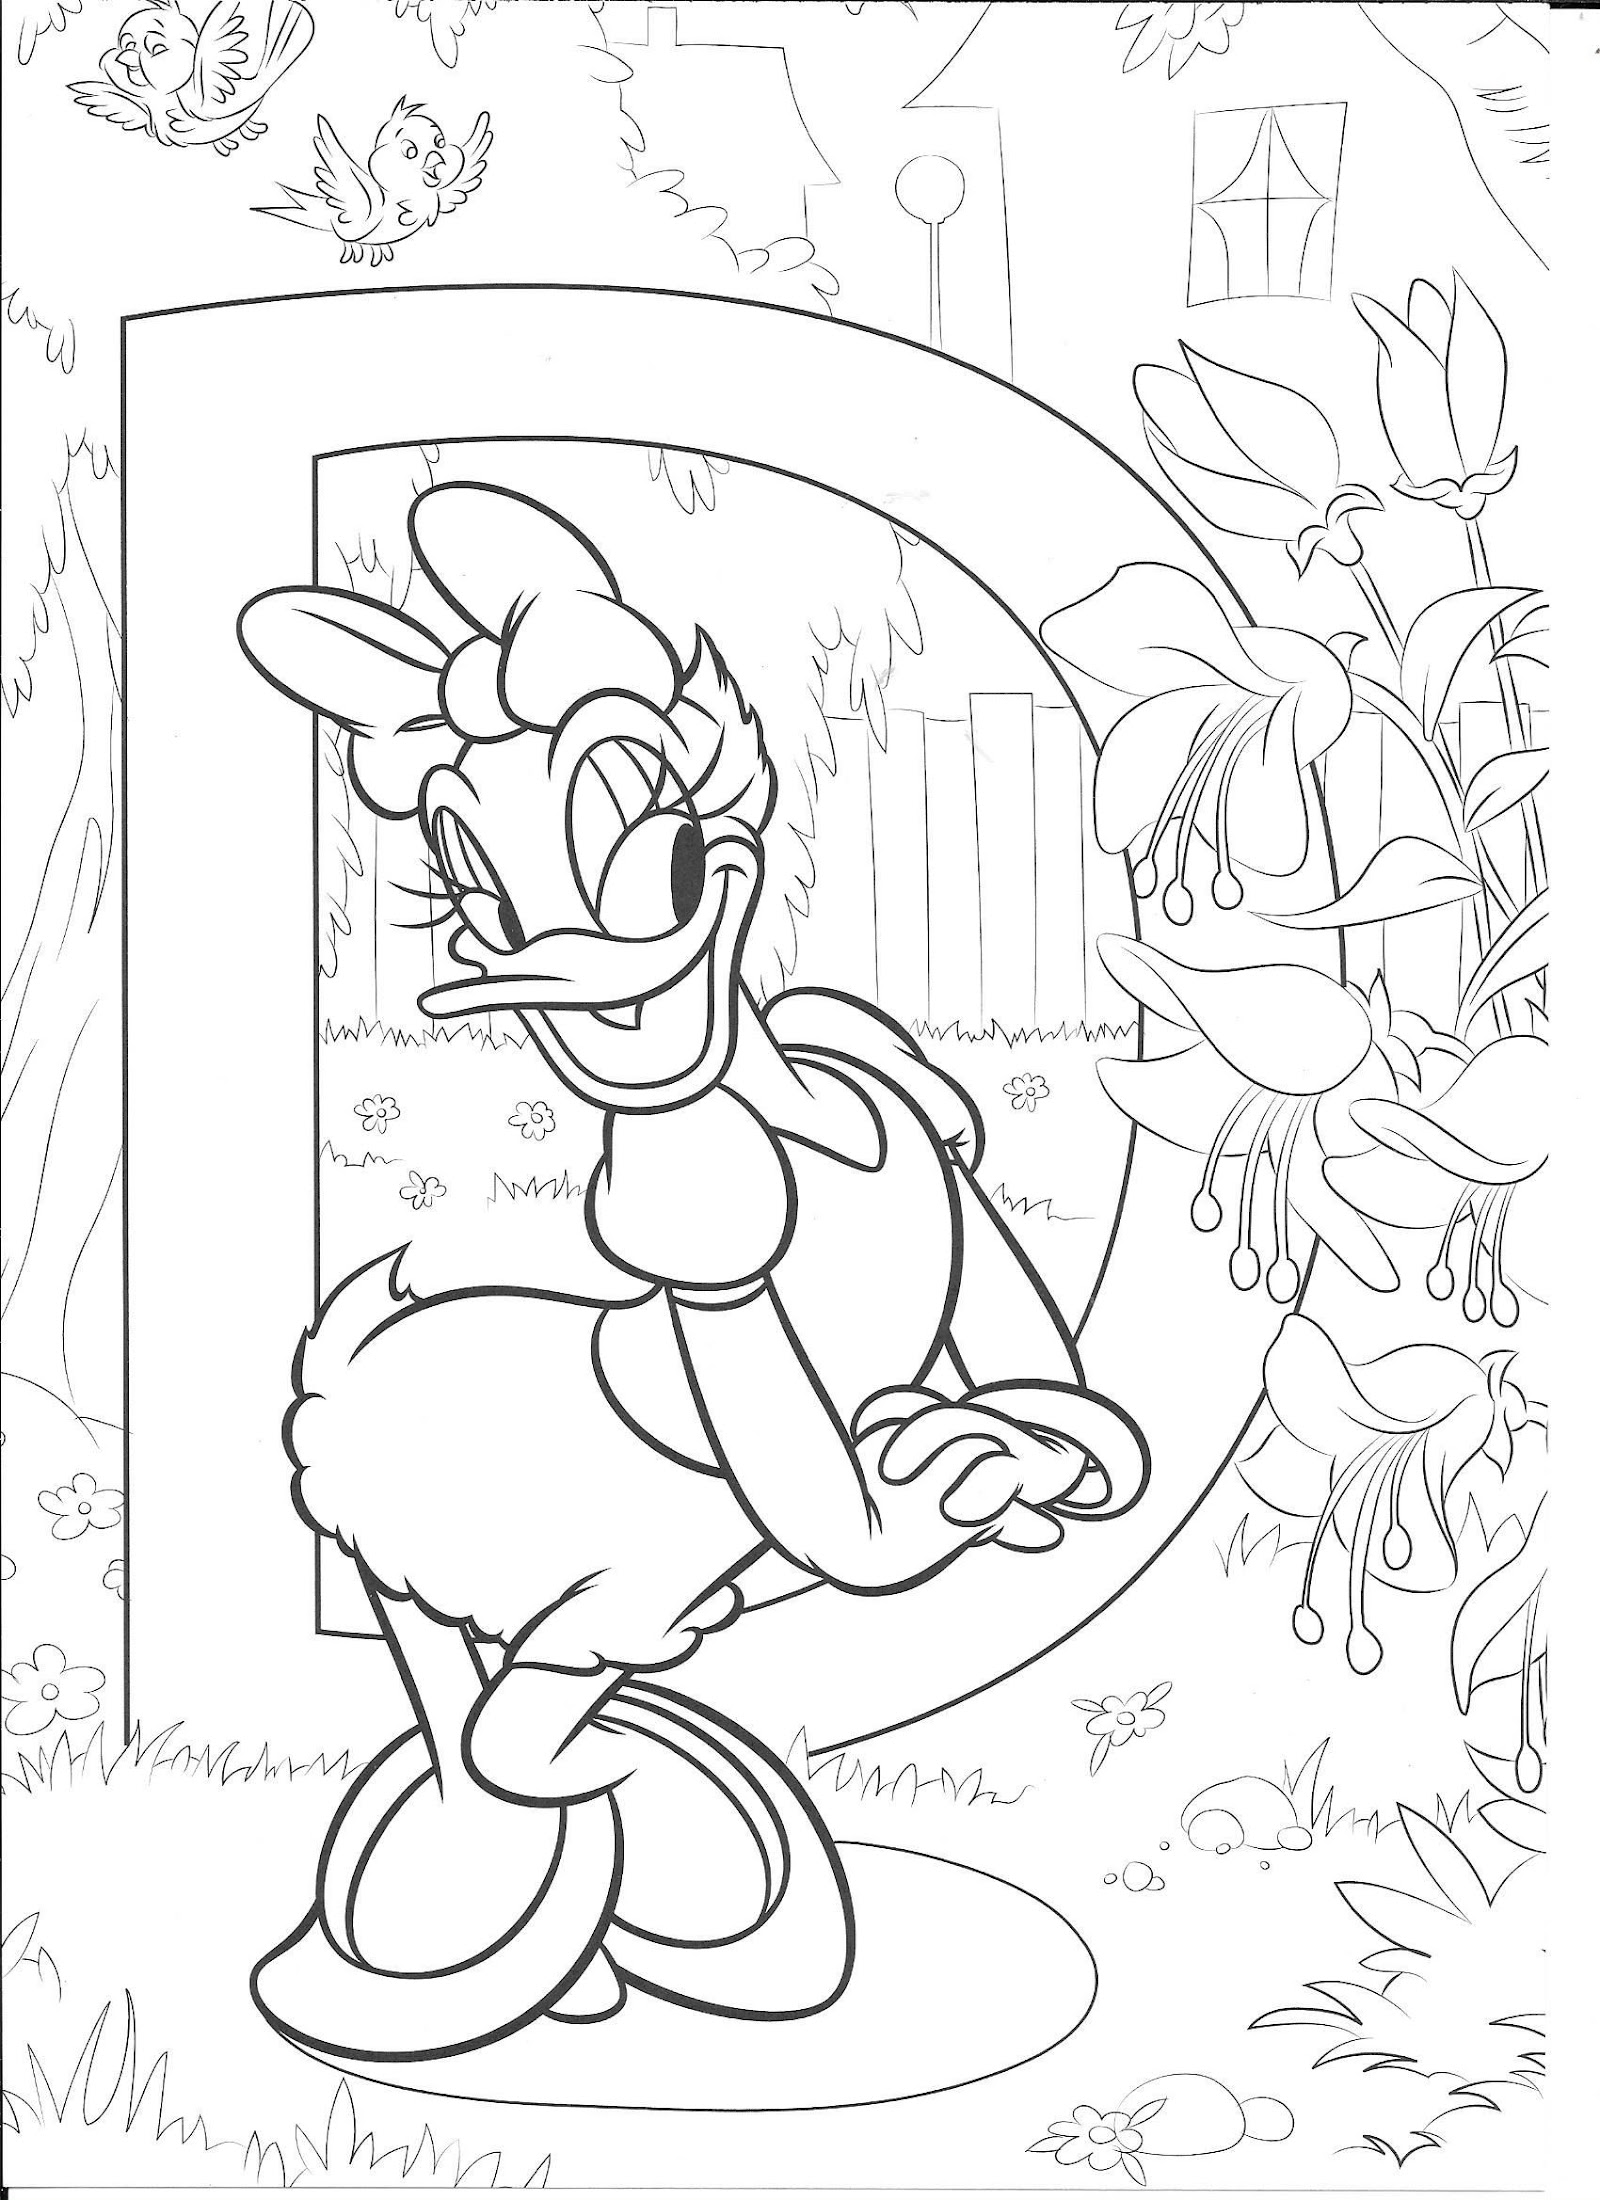 disney-alphabet-coloring-page-202-file-for-free